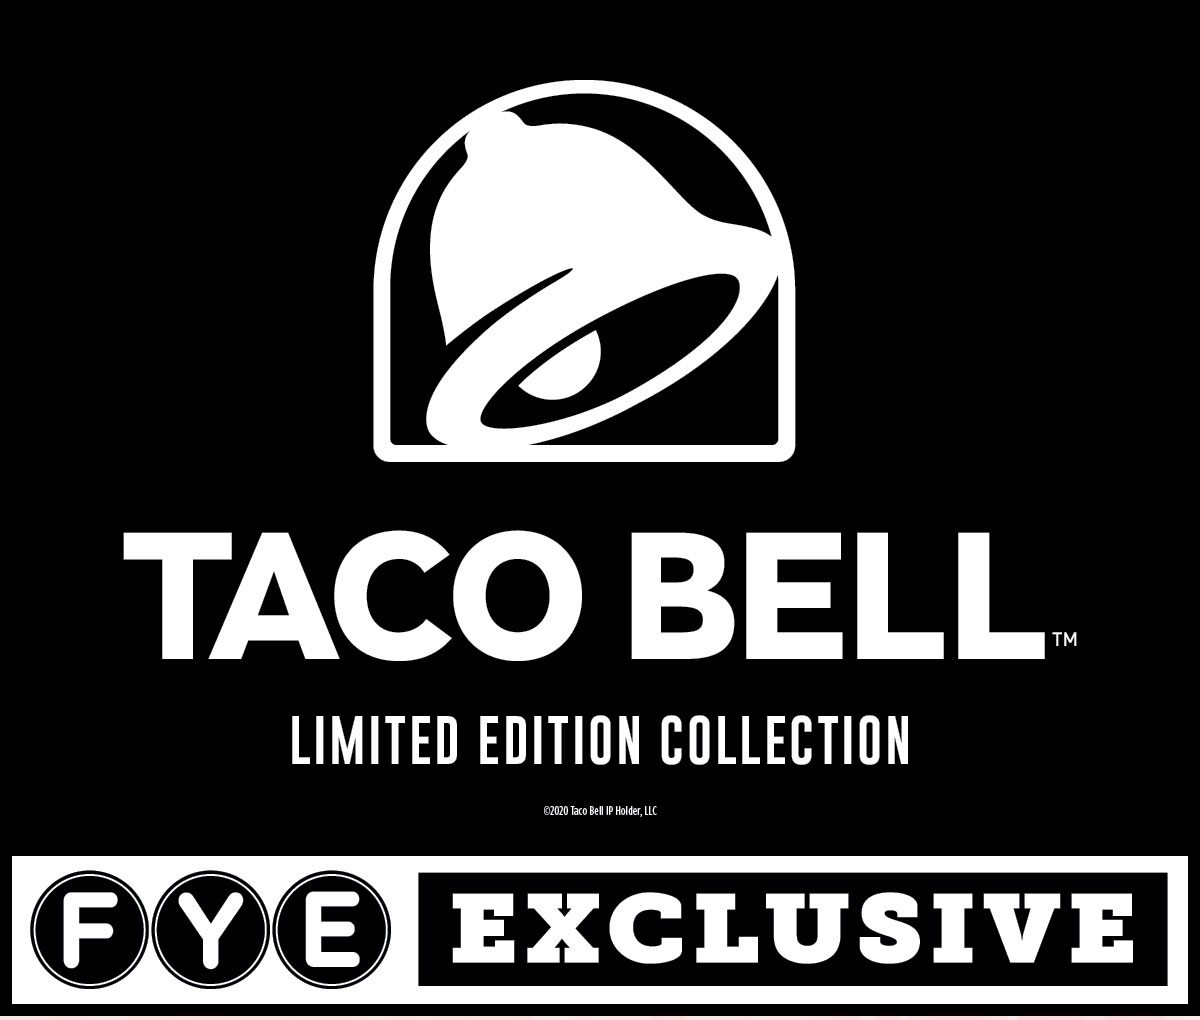 Taco Bell - Limited Edition Collection